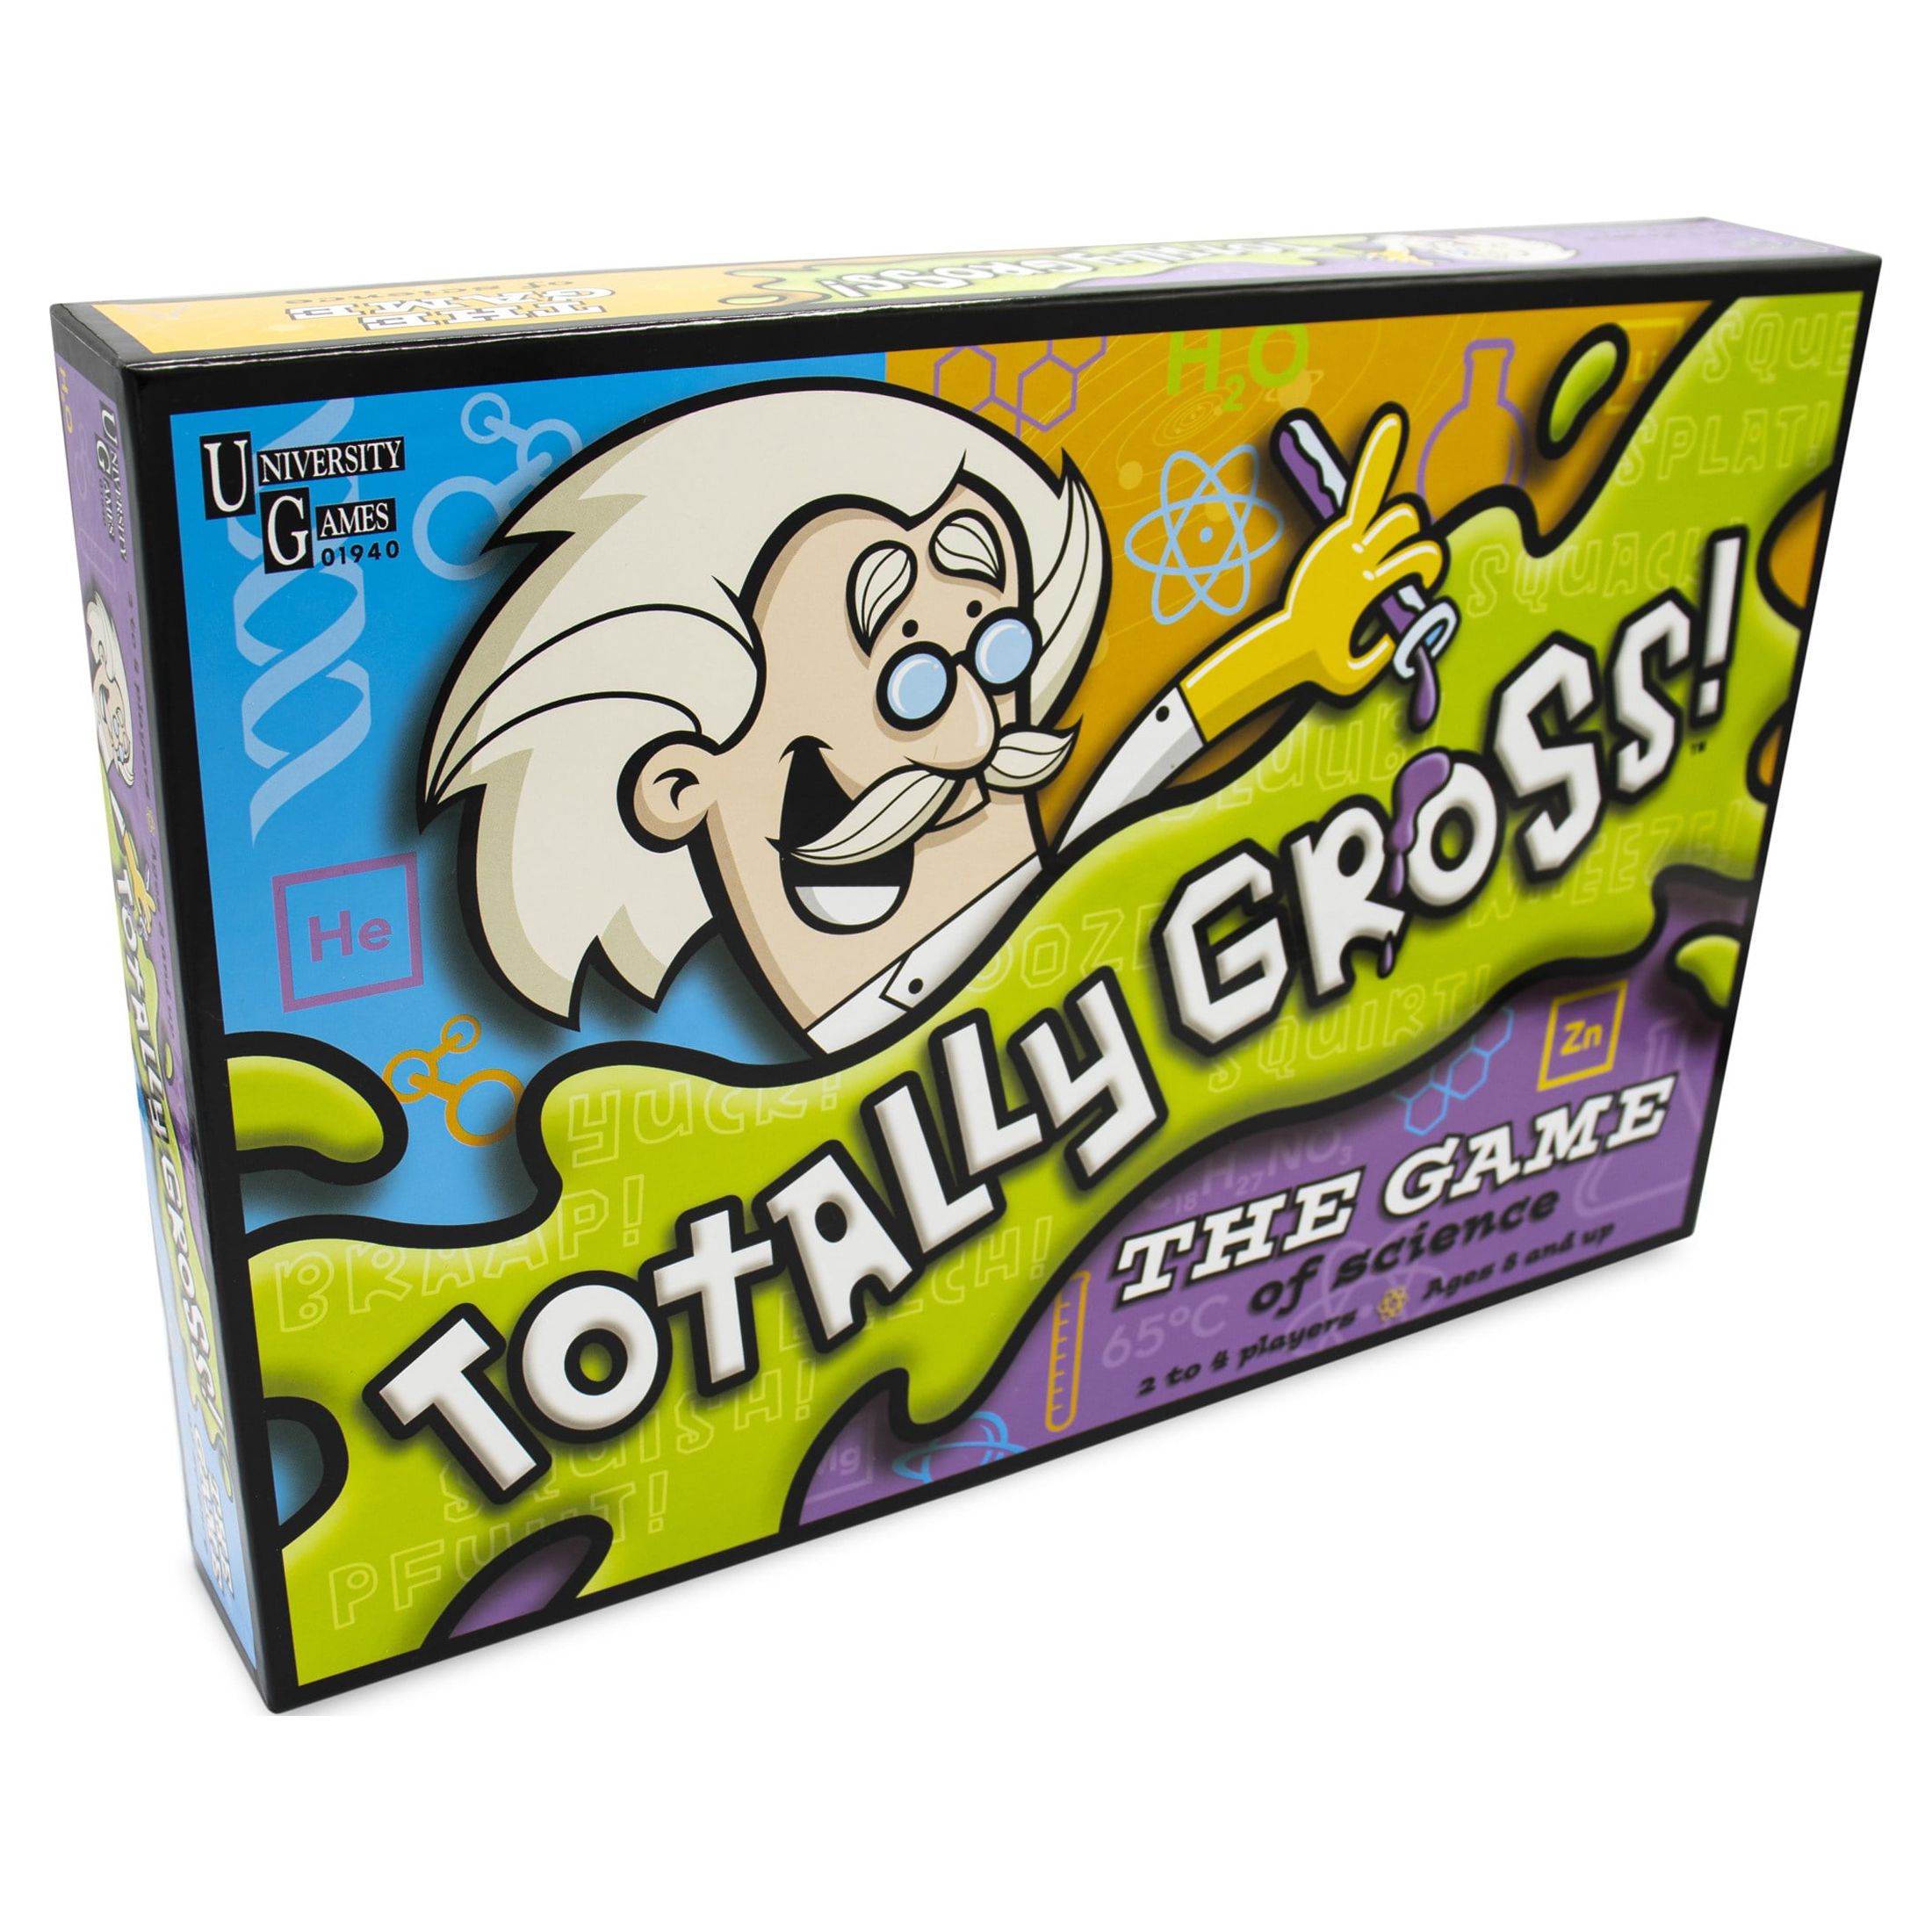 University Games | Totally Gross: The Game of Science - image 1 of 6